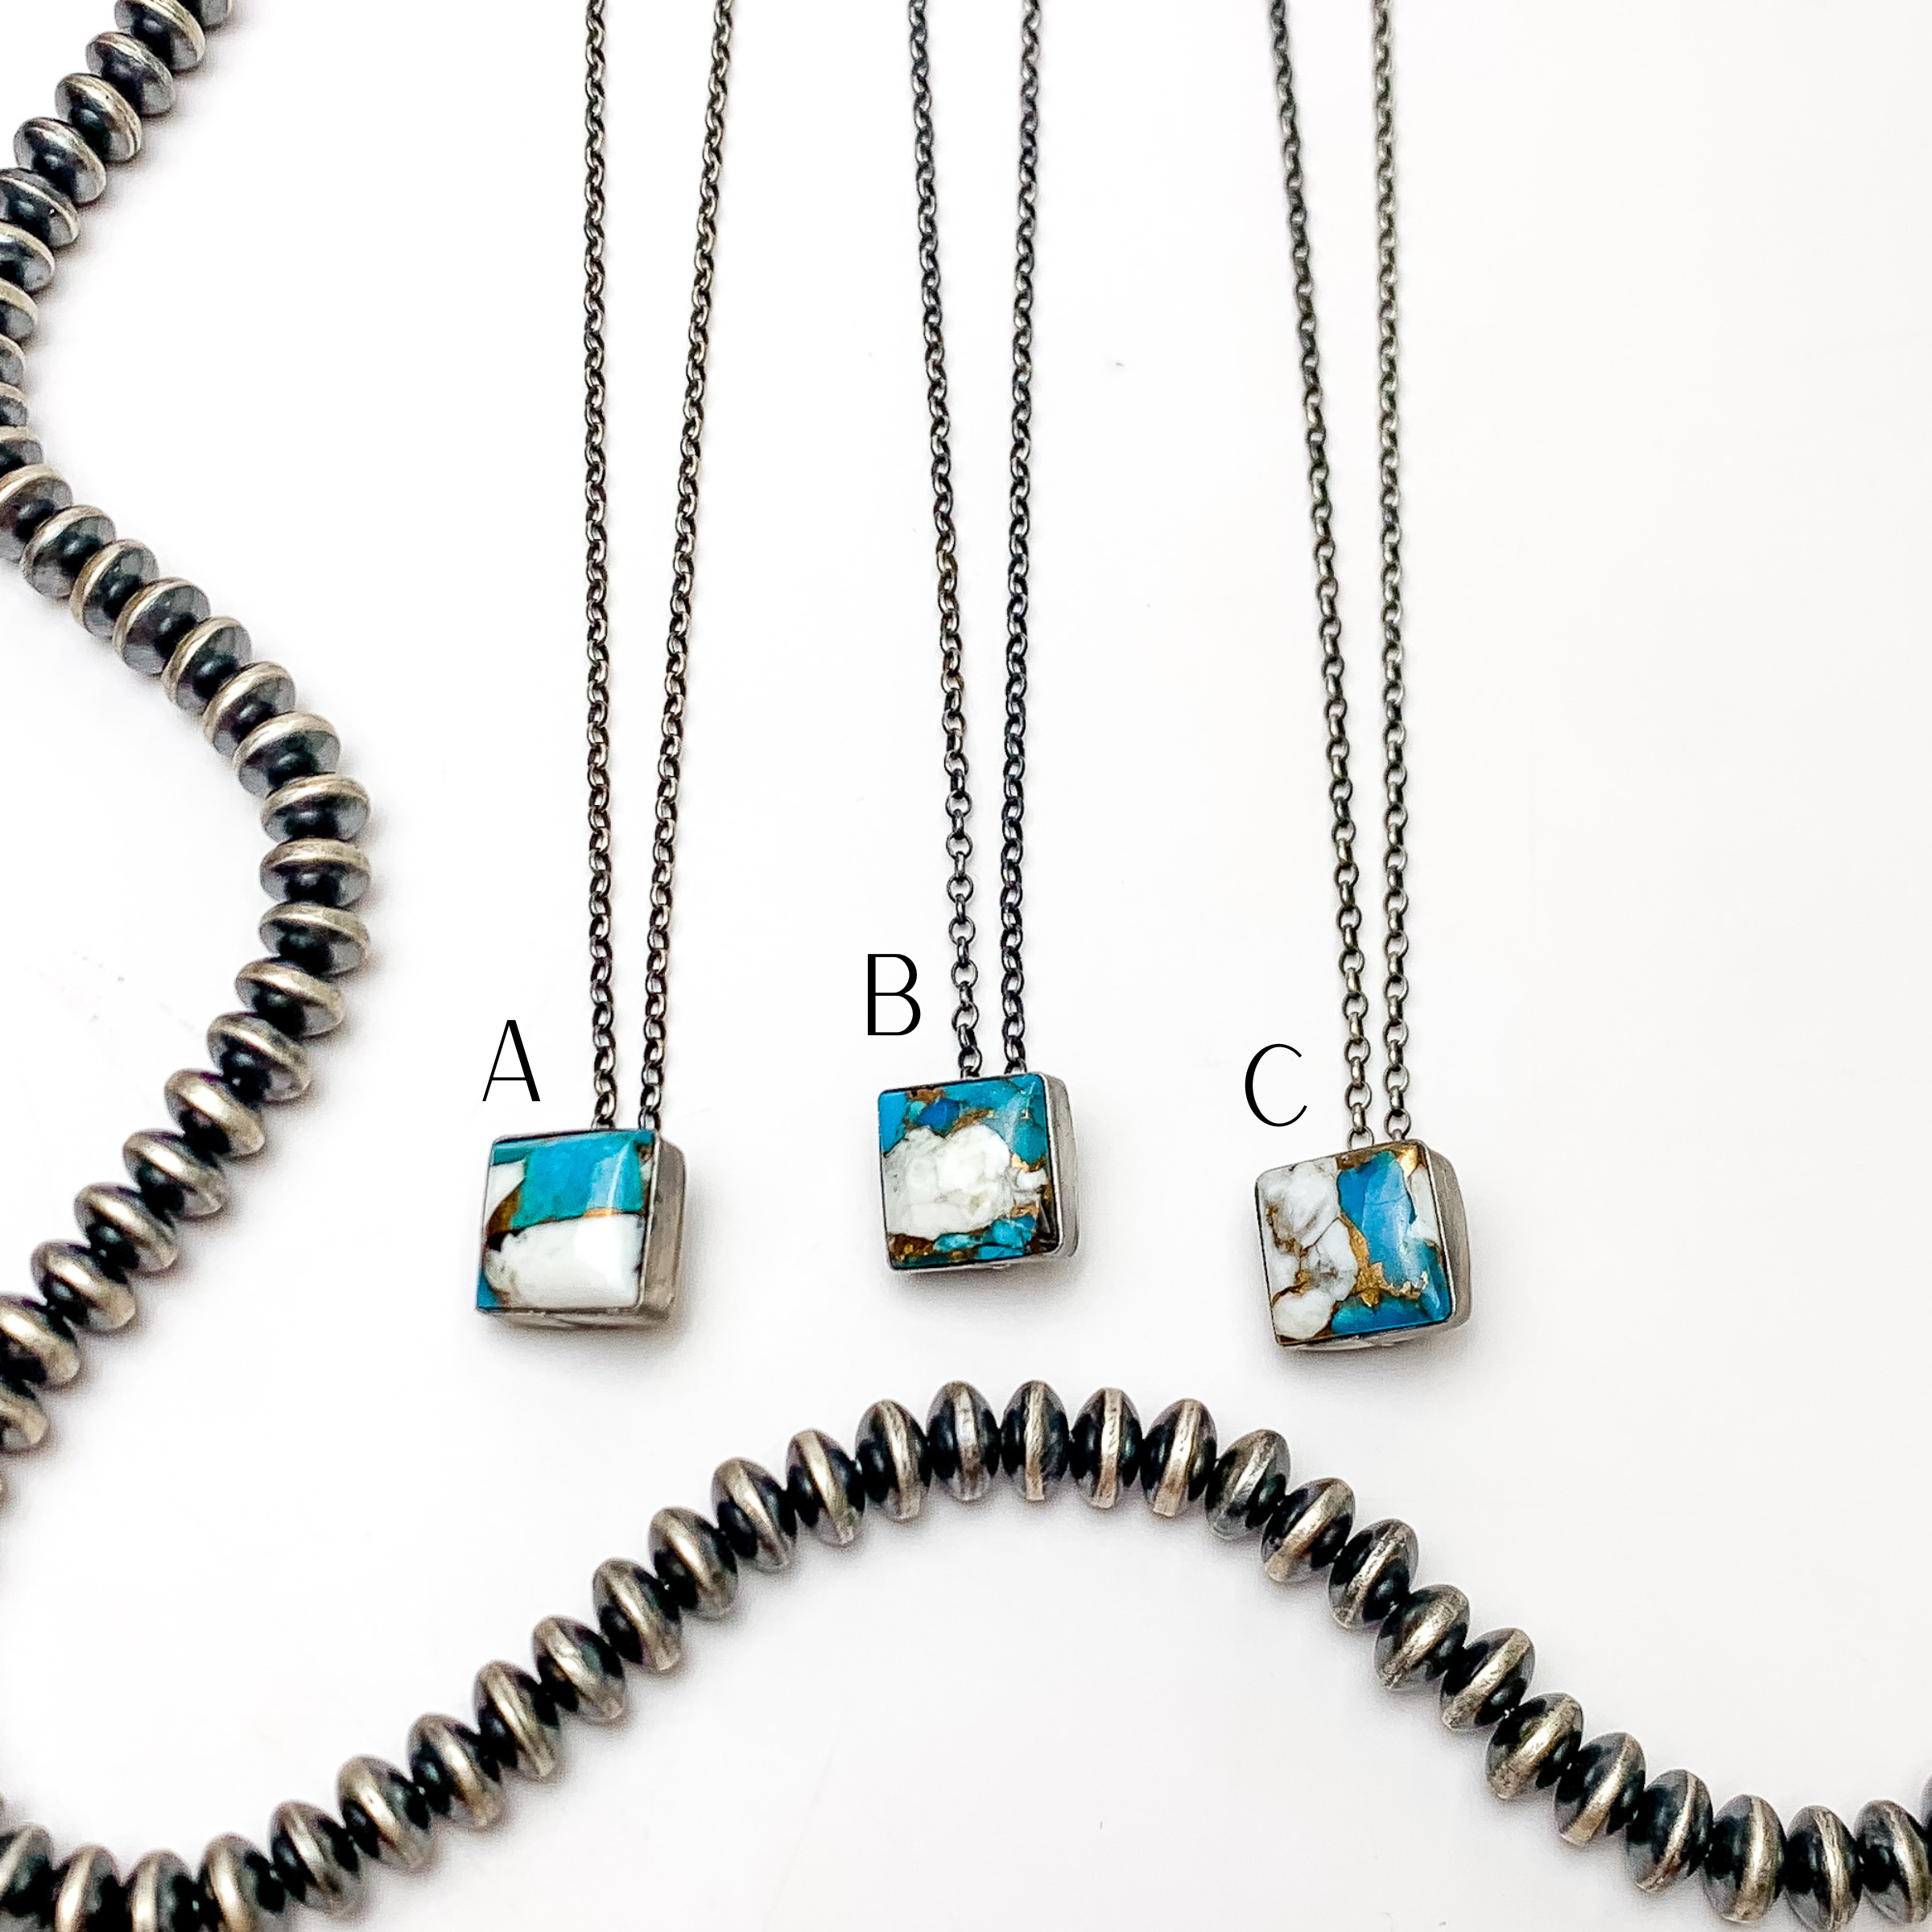 Vernon Kee | Navajo Handmade Sterling Silver Chain Necklace with Multi Spiny Turquoise Square Pendant - Giddy Up Glamour Boutique